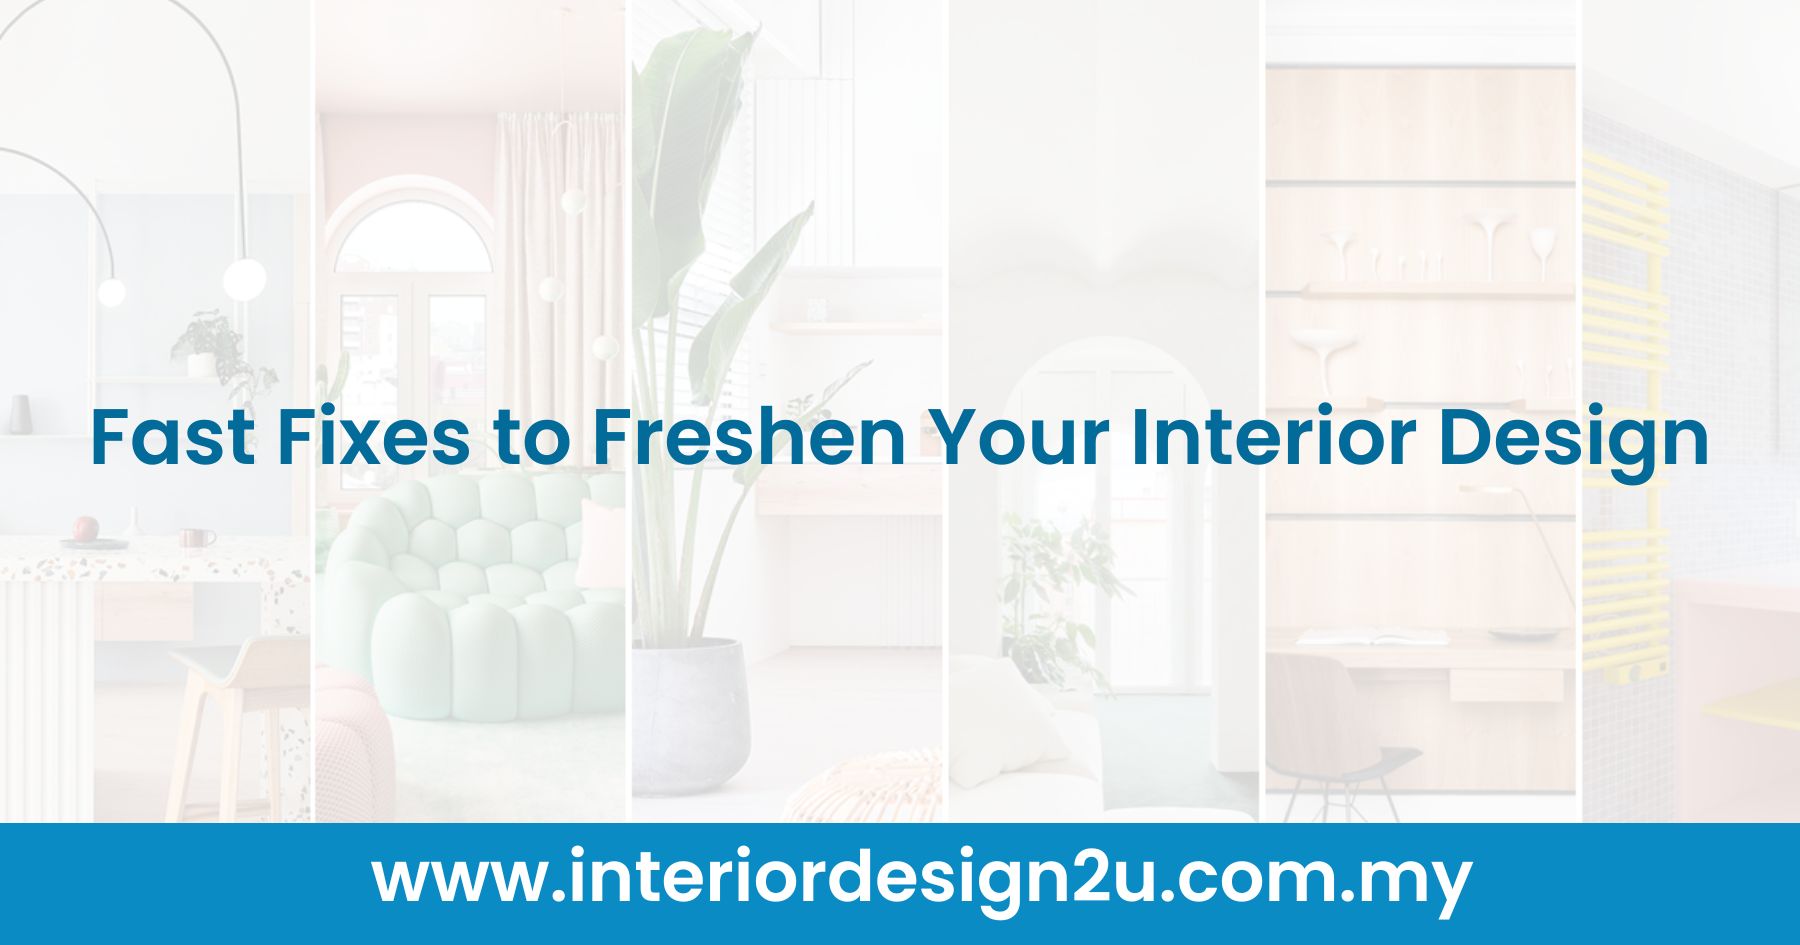 Fast Fixes to Freshen Your Interior Design